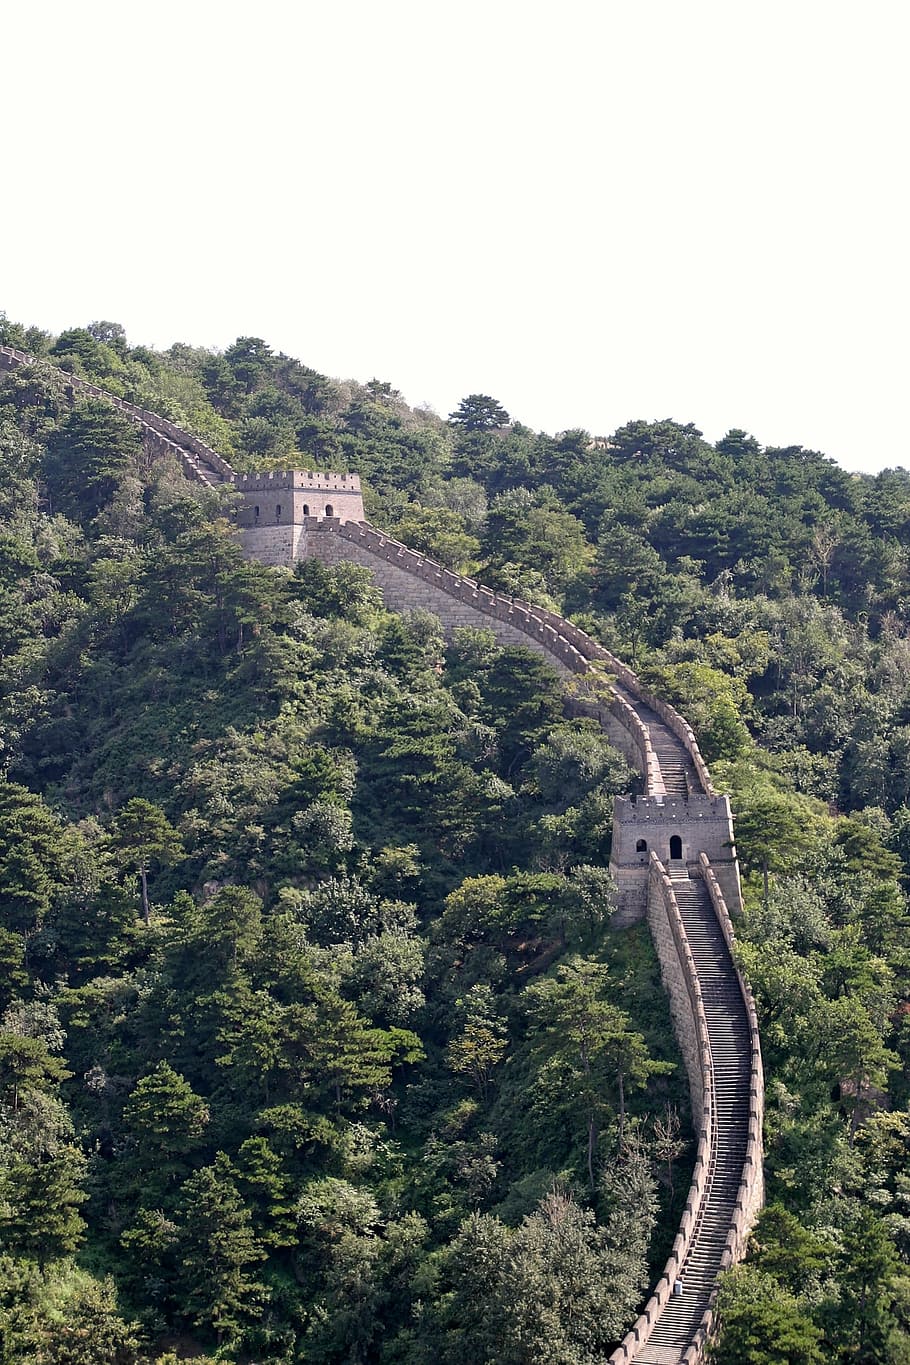 great, wall, china, chinese, large, great wall, places of interest, building, beijing, attraction